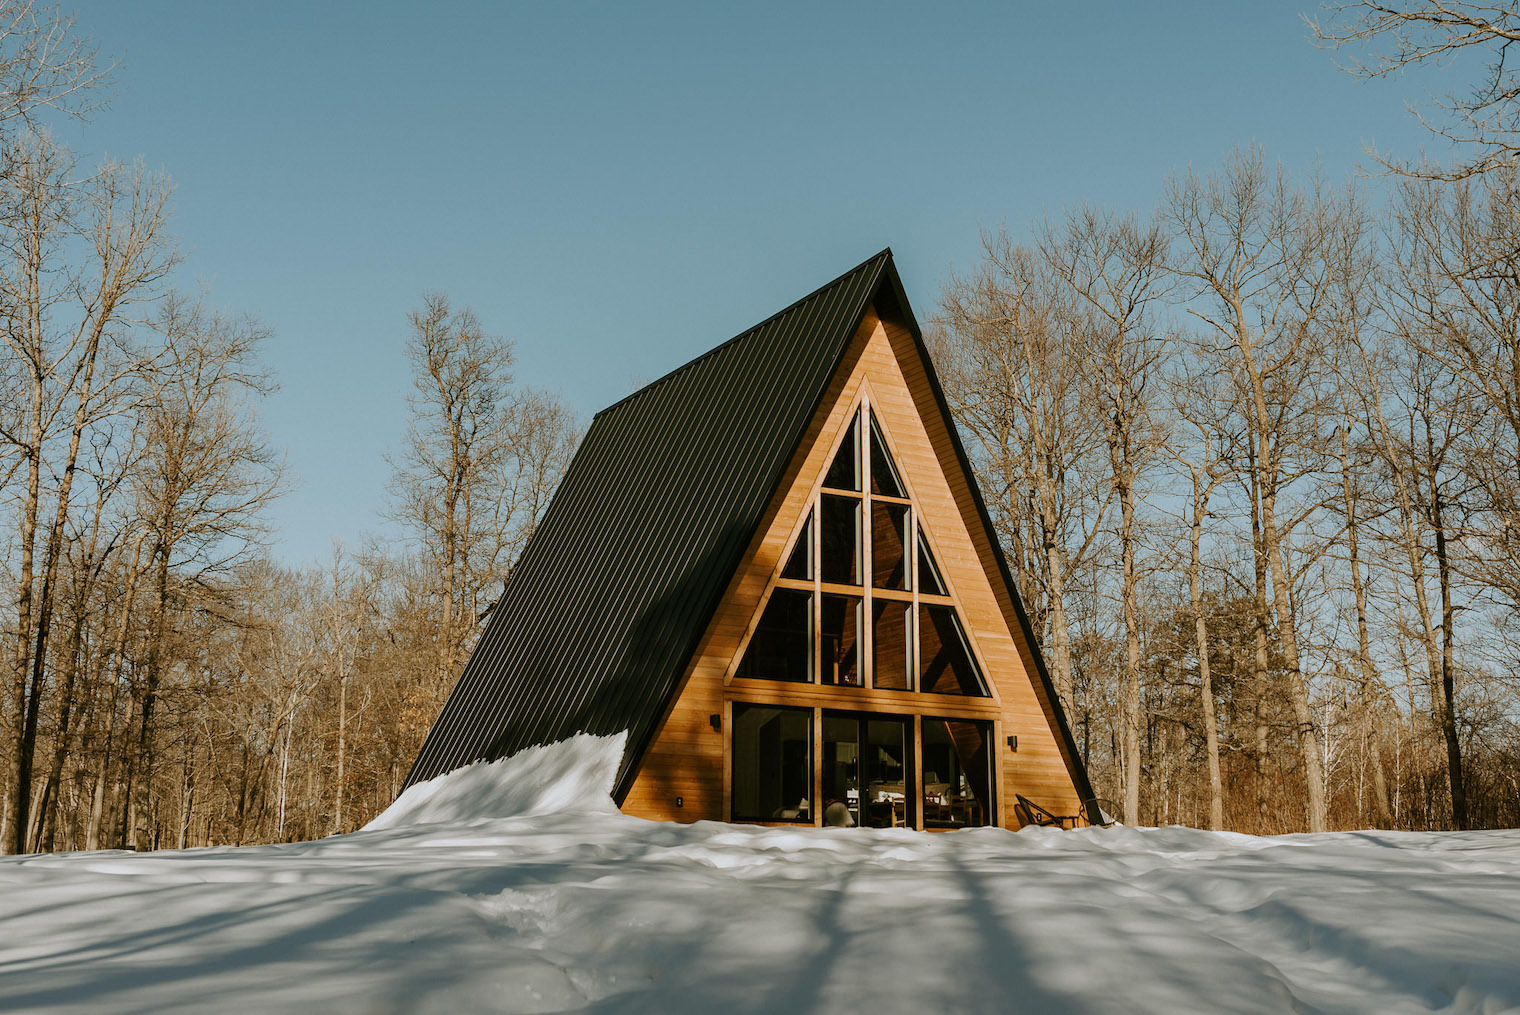 Hilhaus Aframe cabin lit by the sun in snow covered woods.